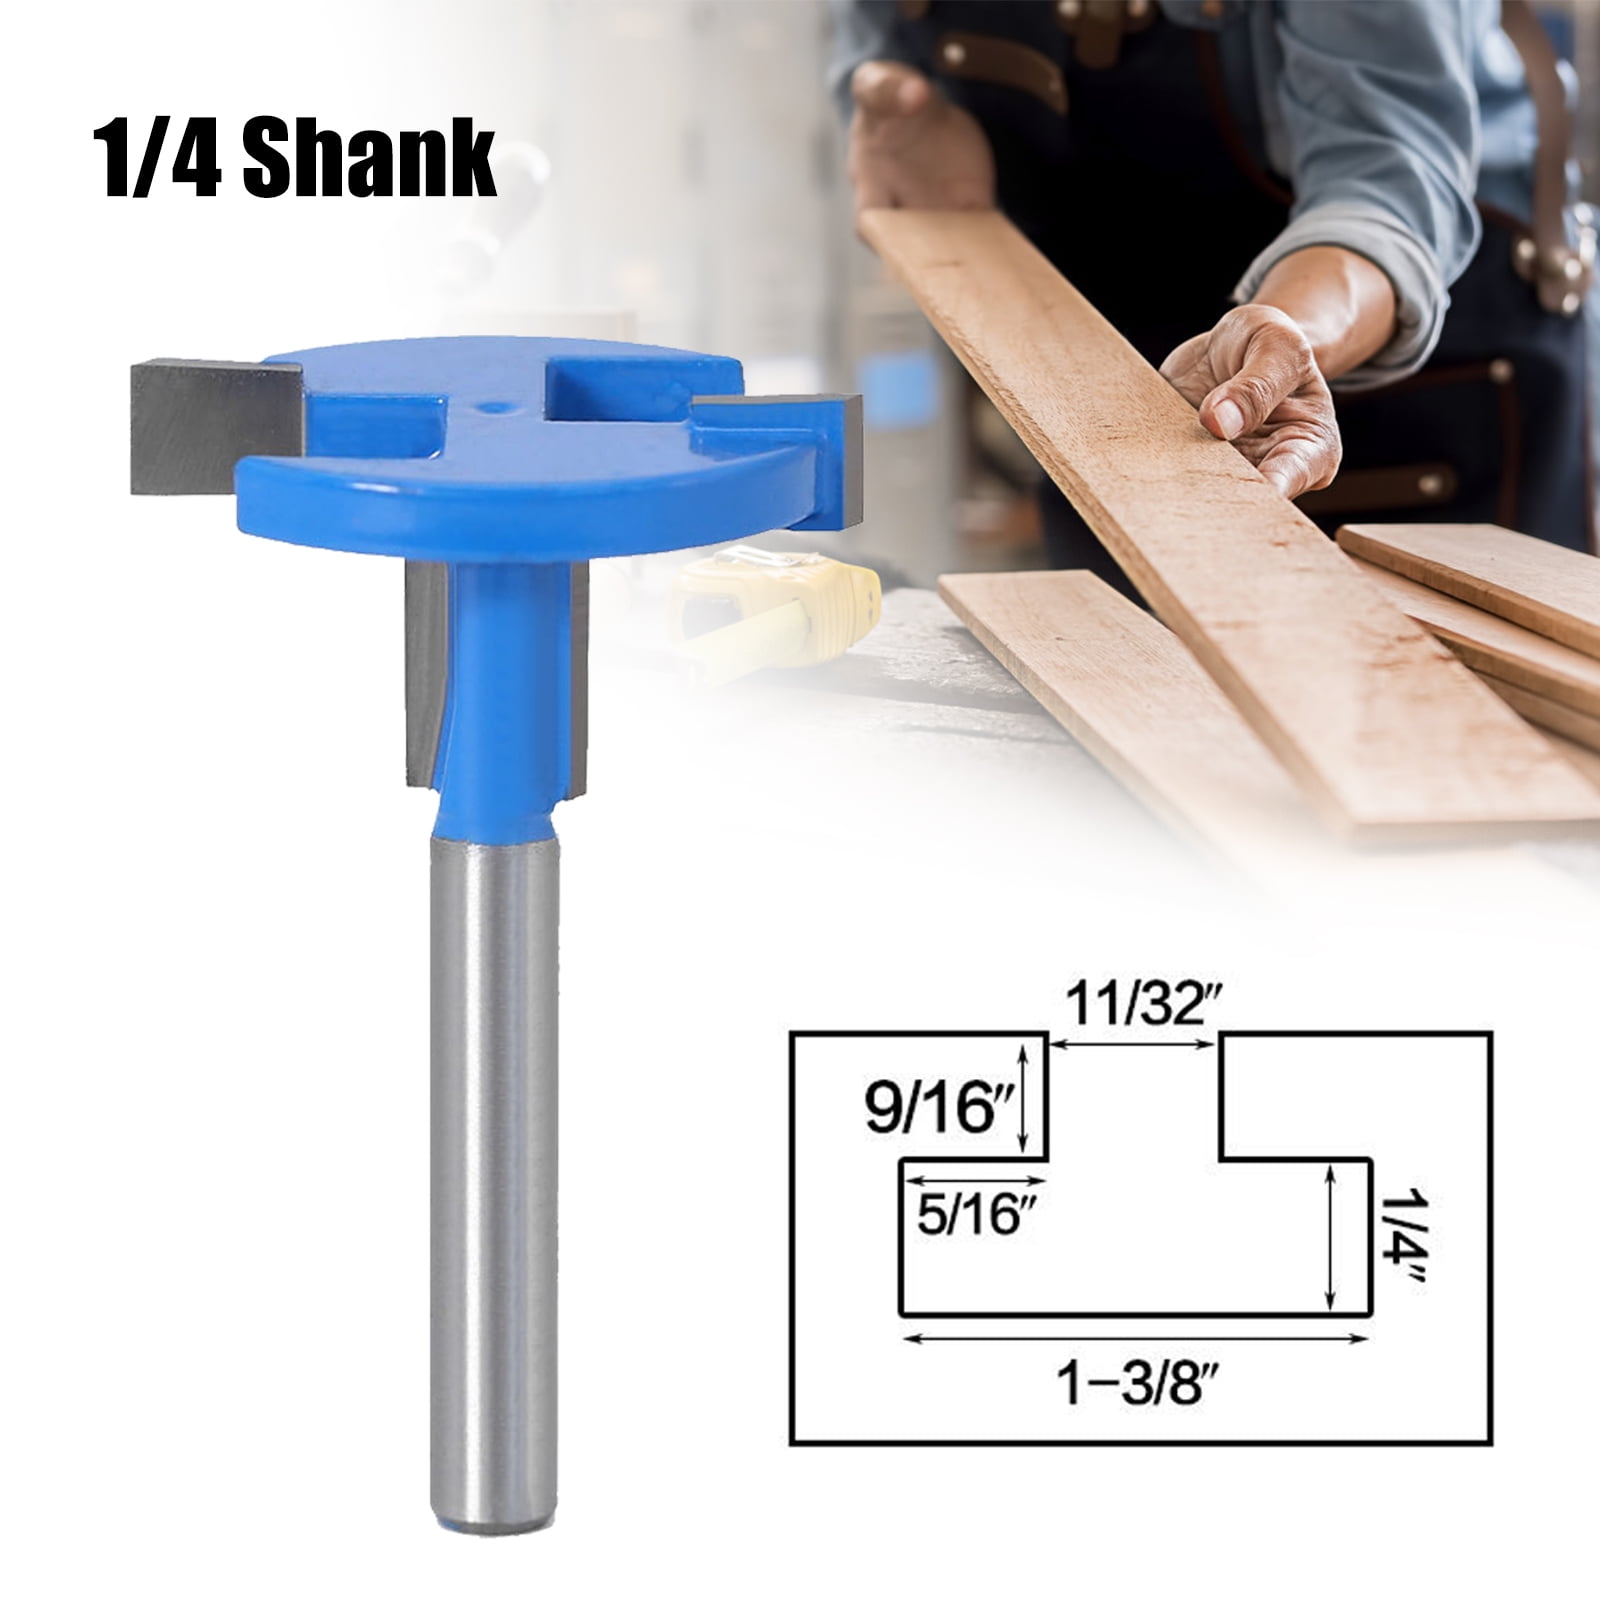 1/4 Inch Shank Straight Router Bit Wood Cutting Router Bit Slotting and Trimming 